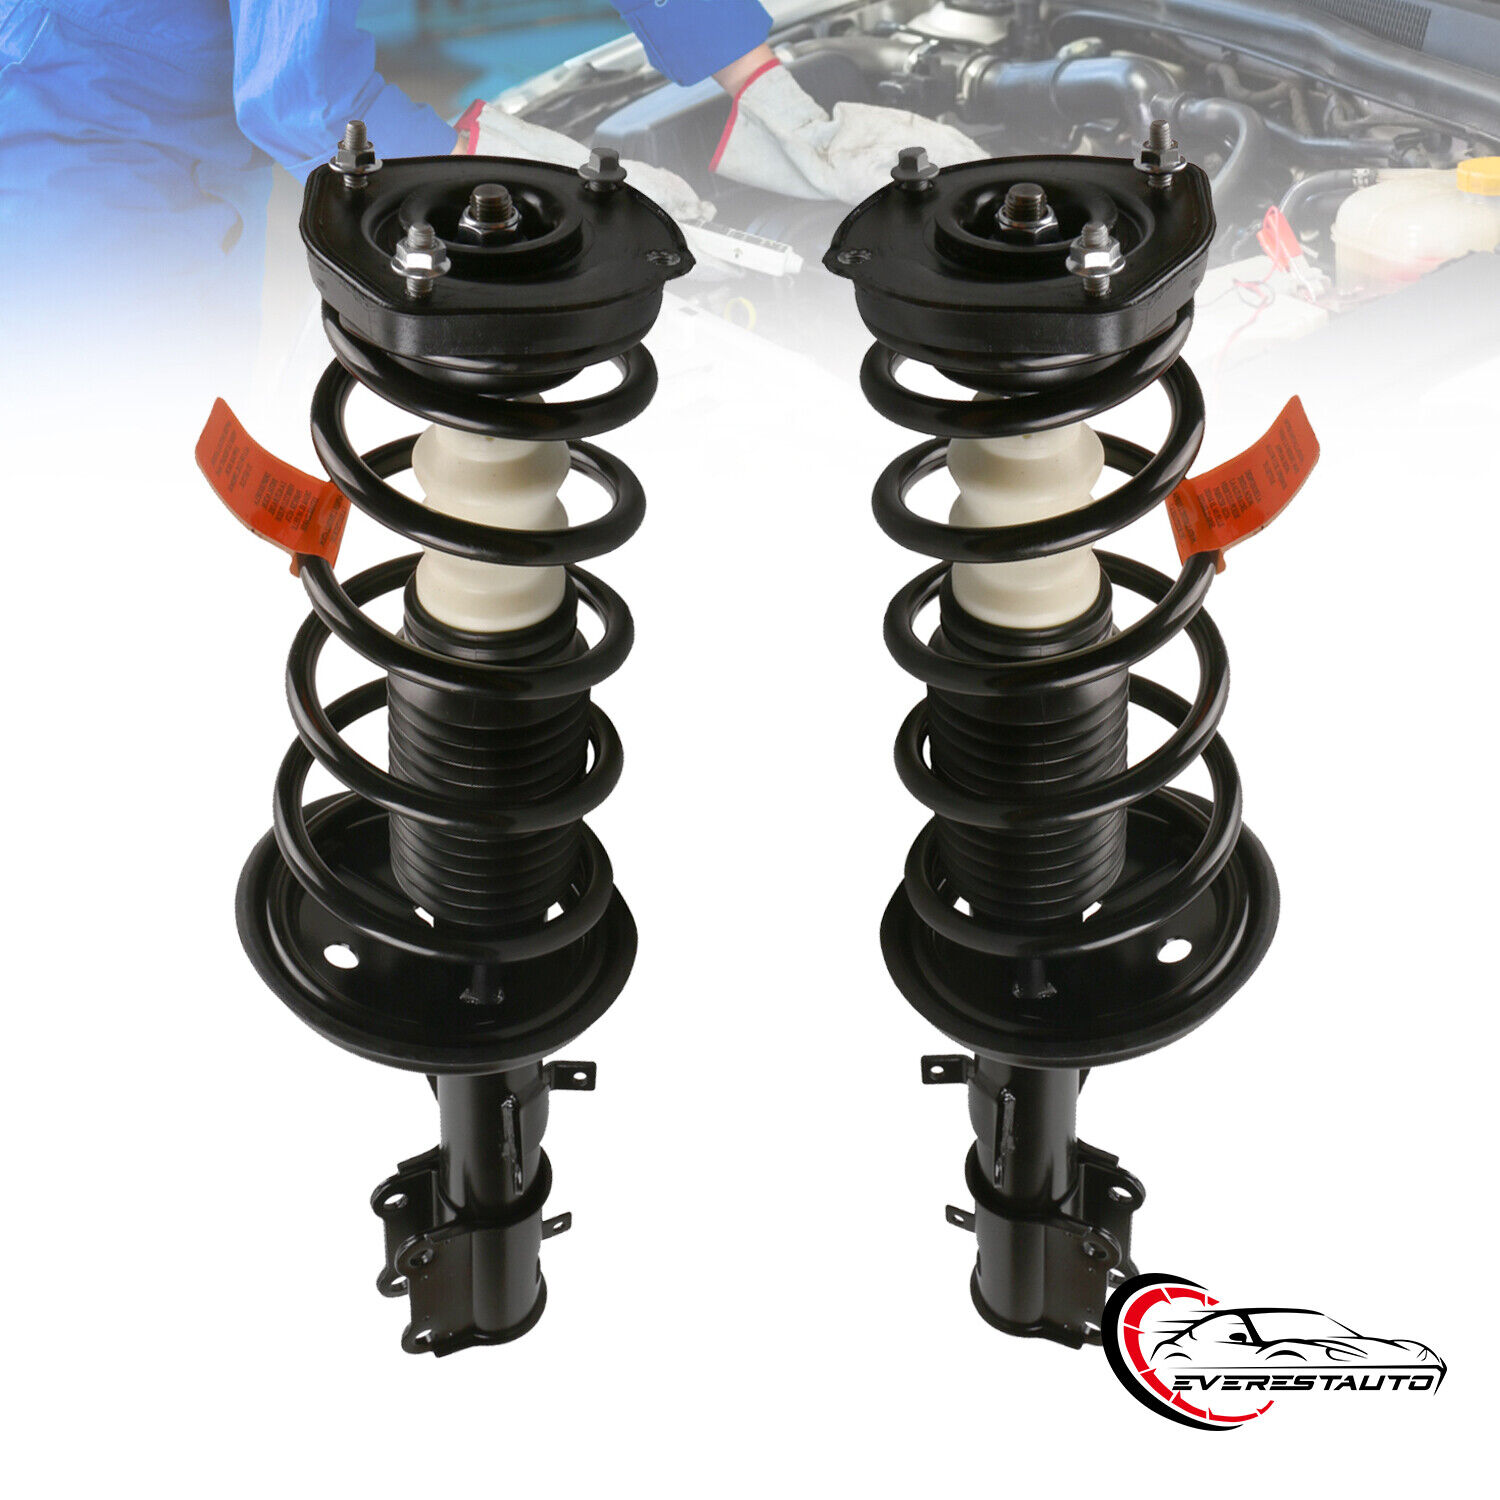 Pair Rear Complete Shock Struts w/ Spring For 1993-2002 Toyota Corolla Geo Prizm